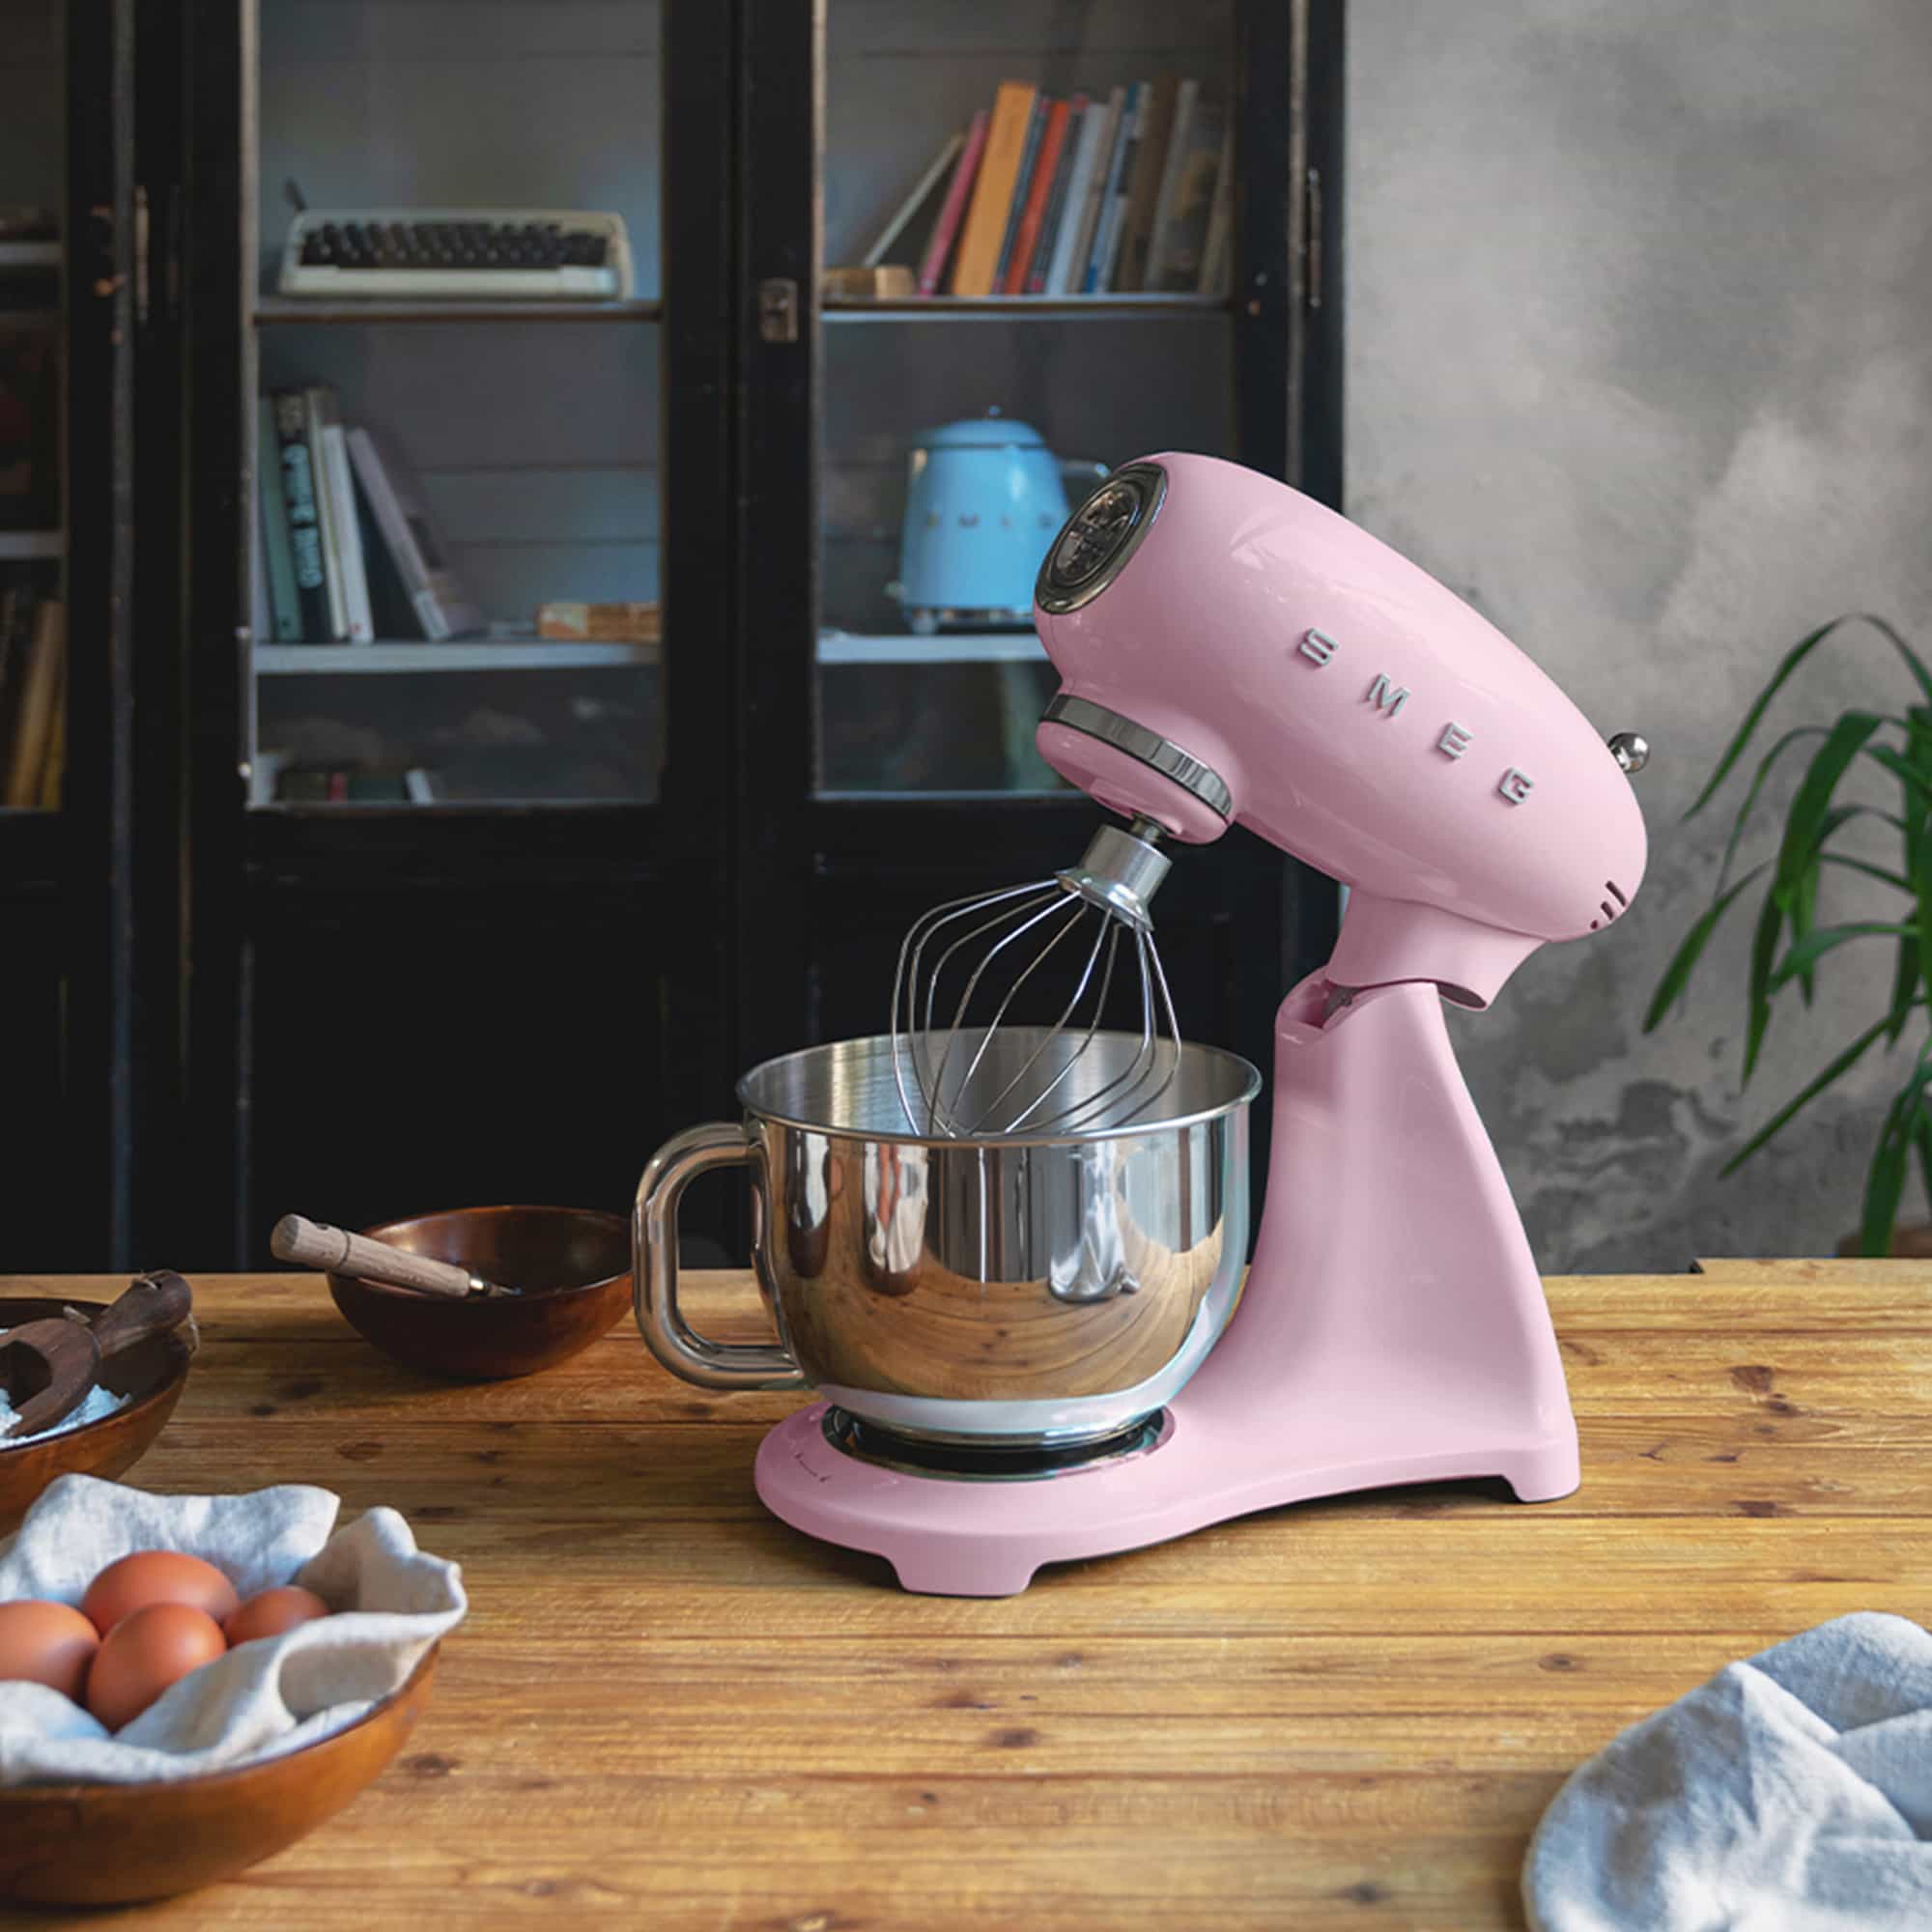 Smeg Stand Mixer Full Color Pink